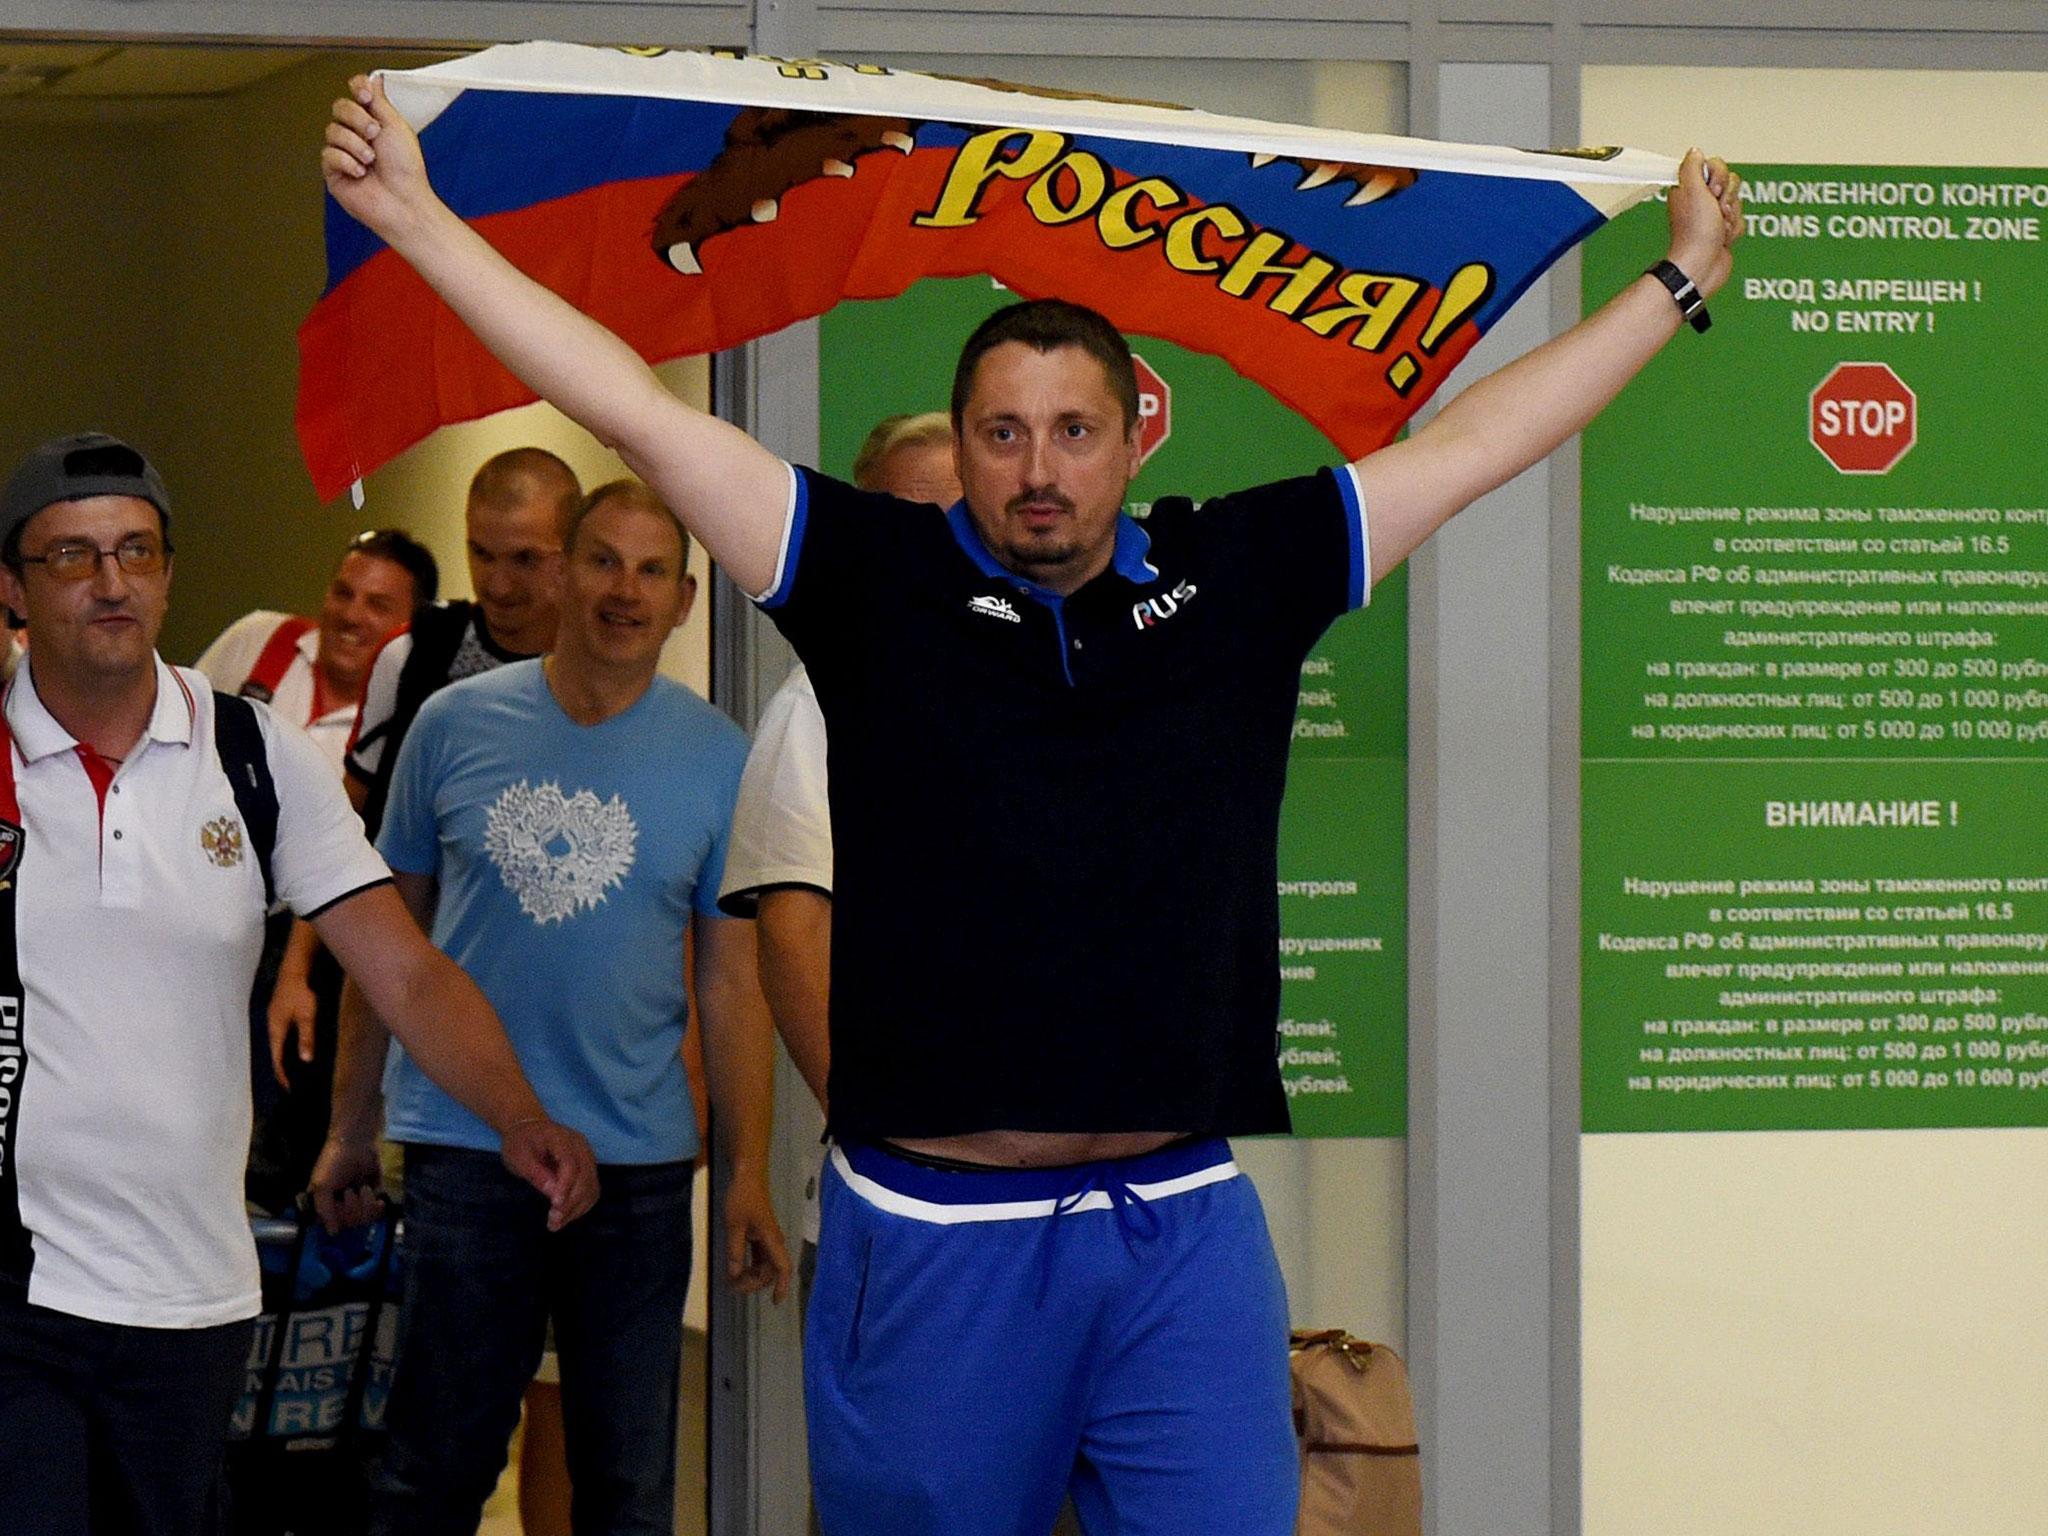 Russia's football fans leader Alexander Shprygin holds a flag as he leaves with others fans the international airport Sheremetevo near Moscow late on 18 June, 2016 after being expelled from France